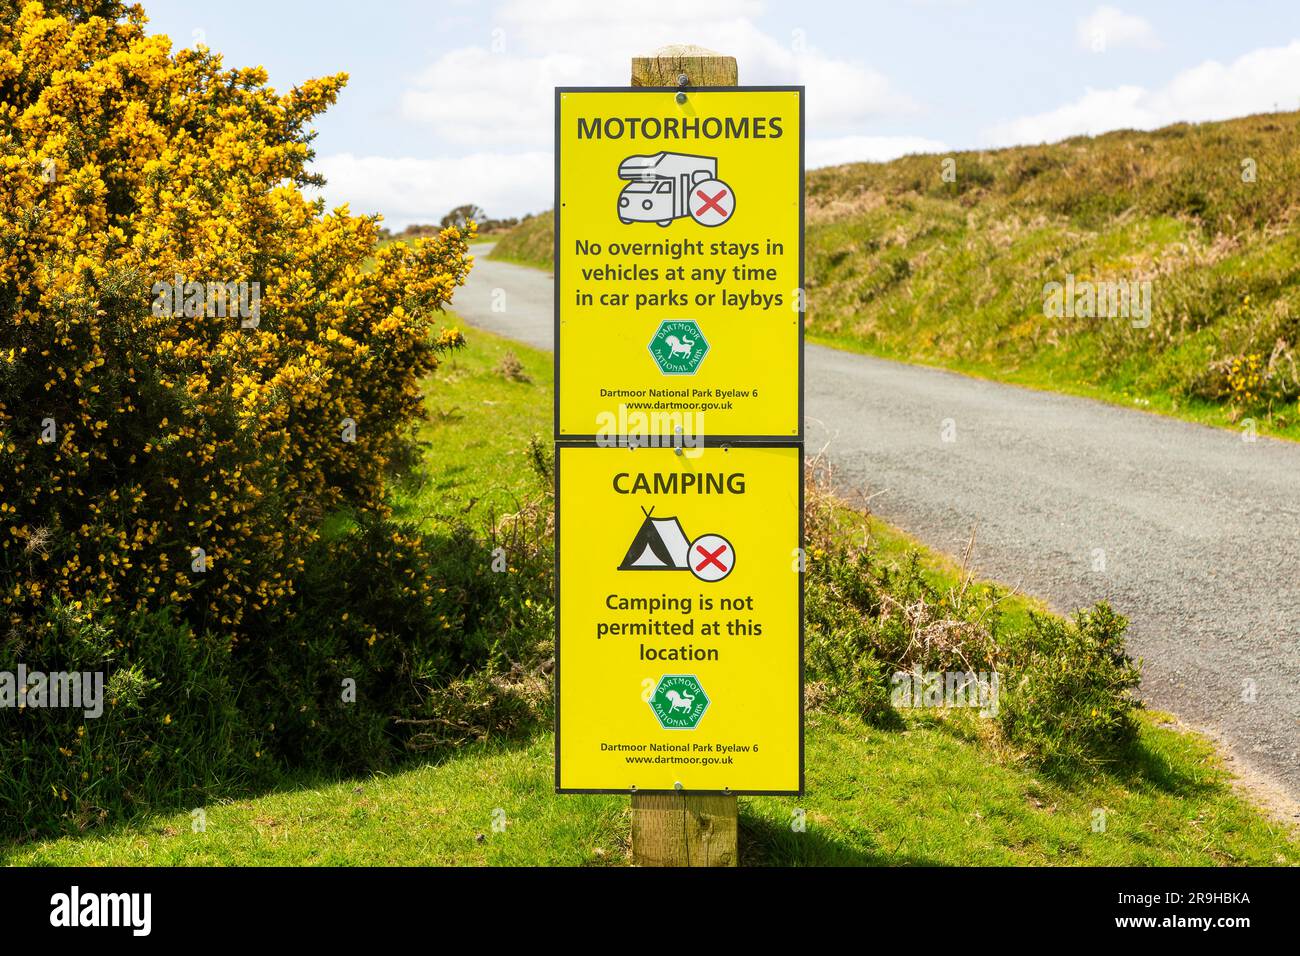 Signs warning of restrictions on camping and overnight stays in motorhomes, Dartmoor, Devon, England, UK Stock Photo